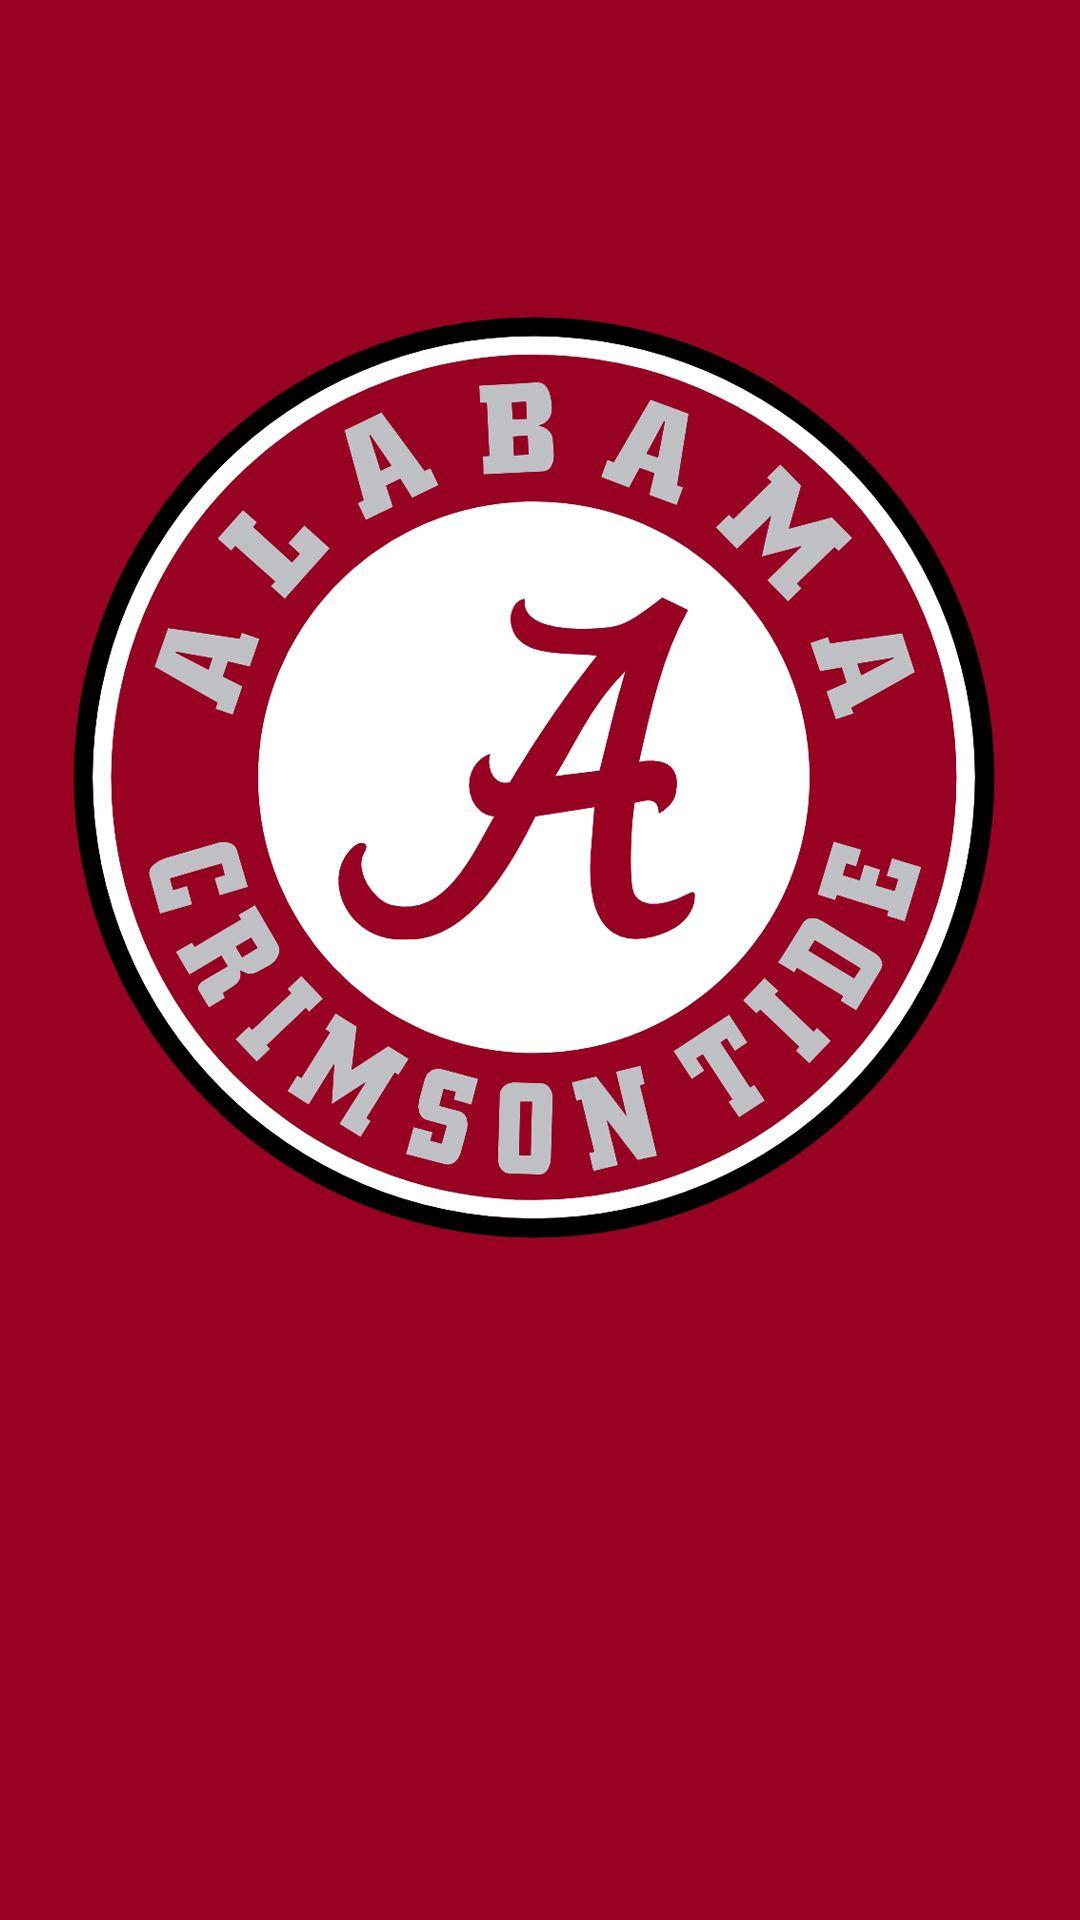 Free Alabama Wallpaper For Mobile Phones with Logo. Android